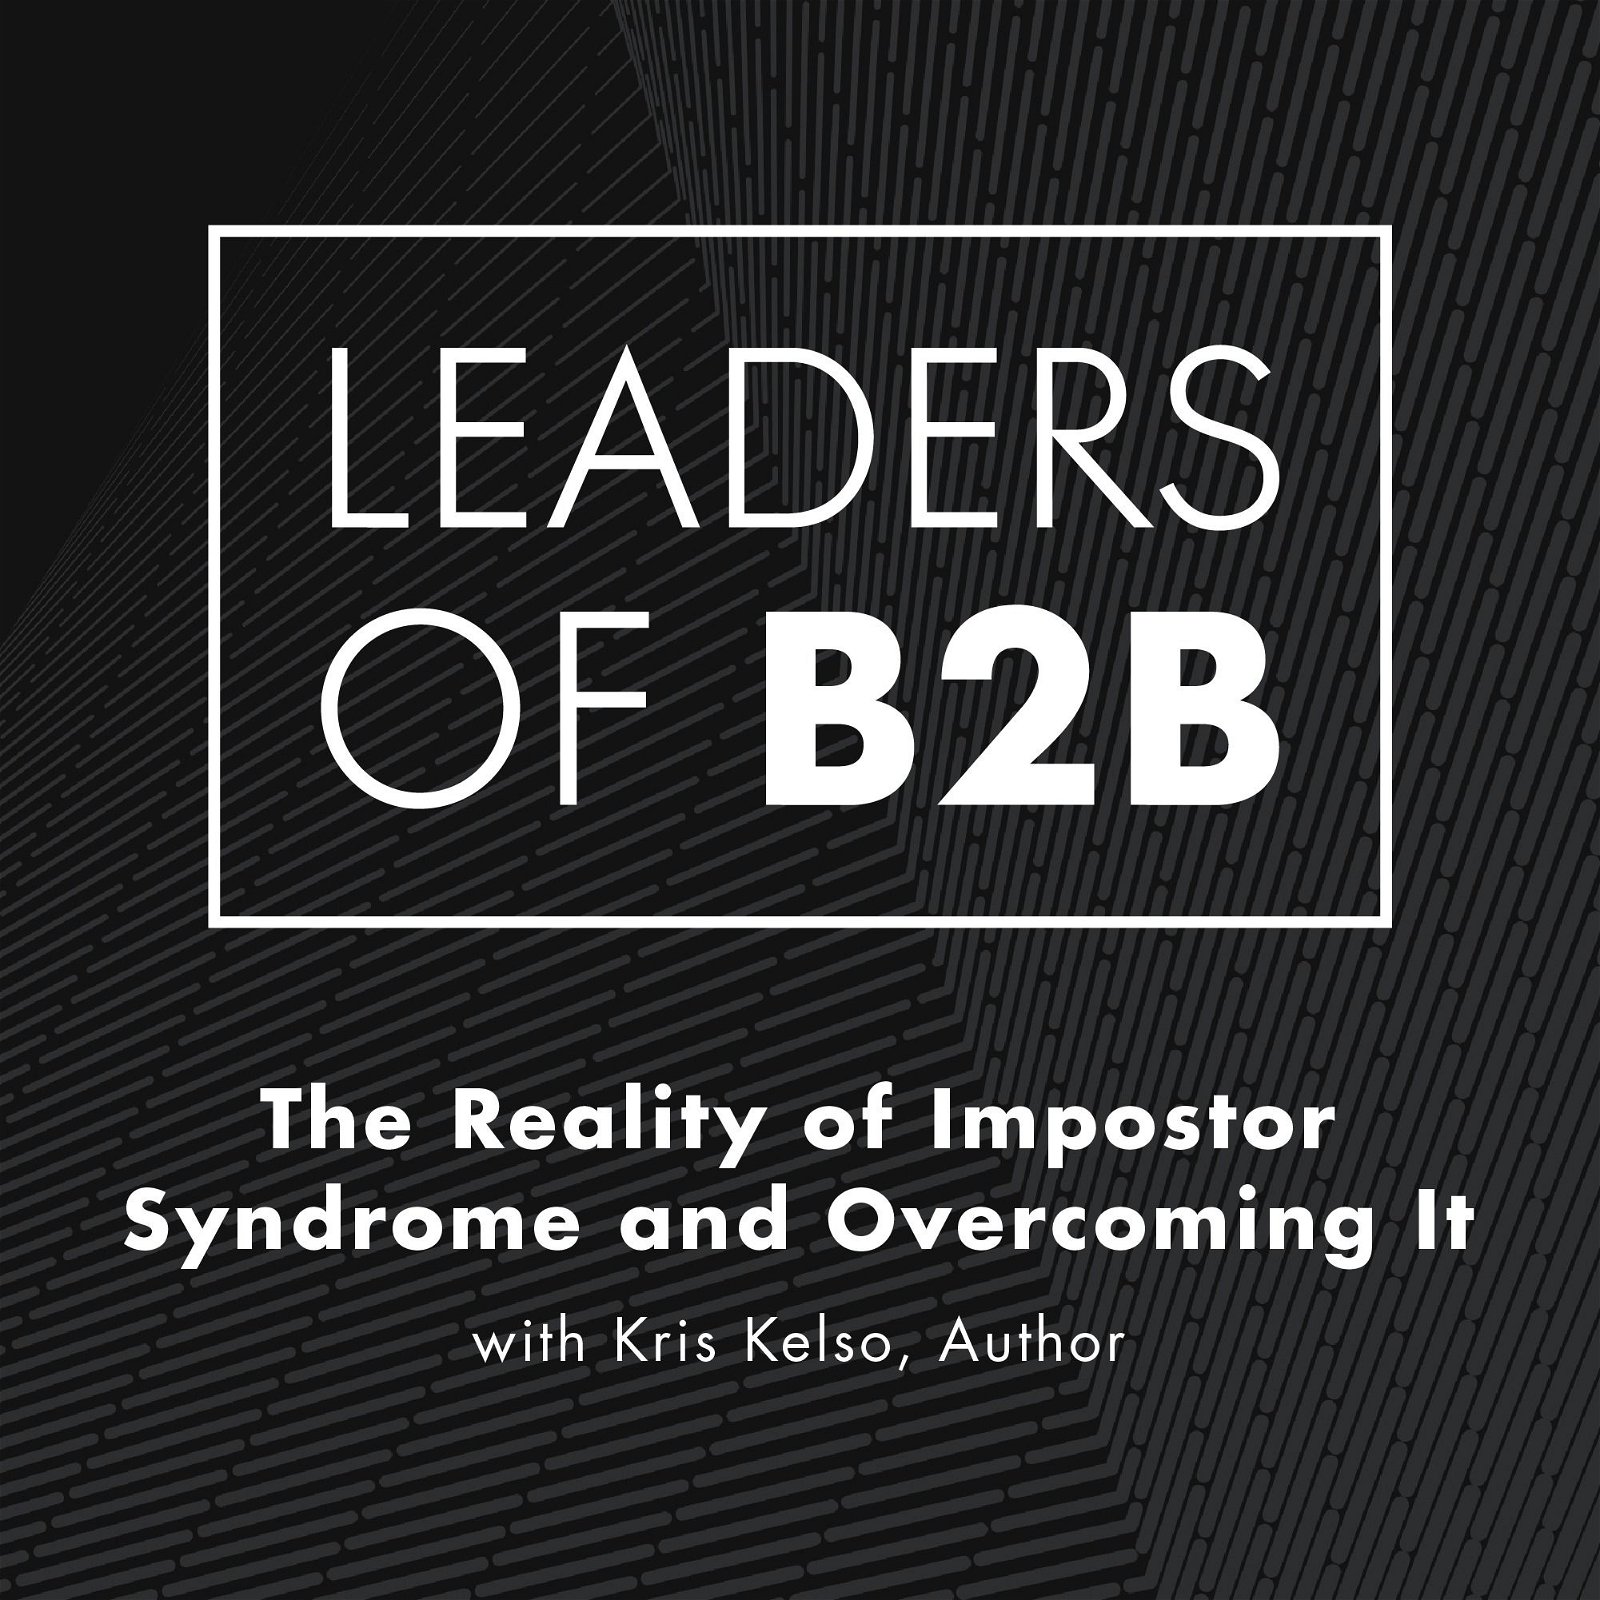 The Reality of Impostor Syndrome and Overcoming It with Kris Kelso, Author